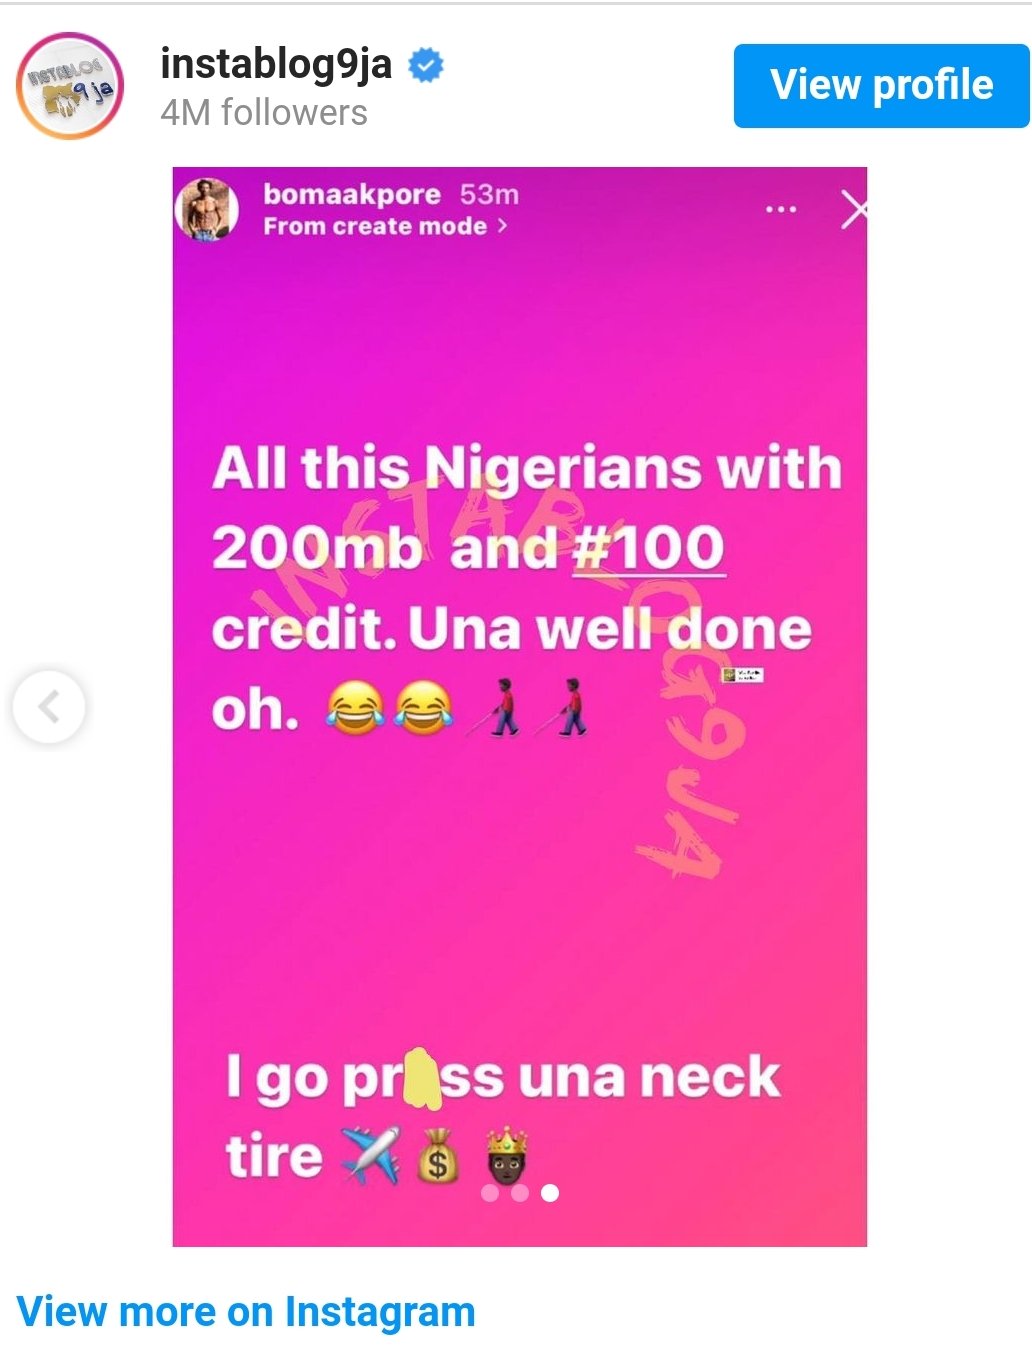 I Go Press Una Neck Tire: BBNaija’s Boma Reacts to Claims That He Didn’t Go Shopping in Dubai With Colleagues